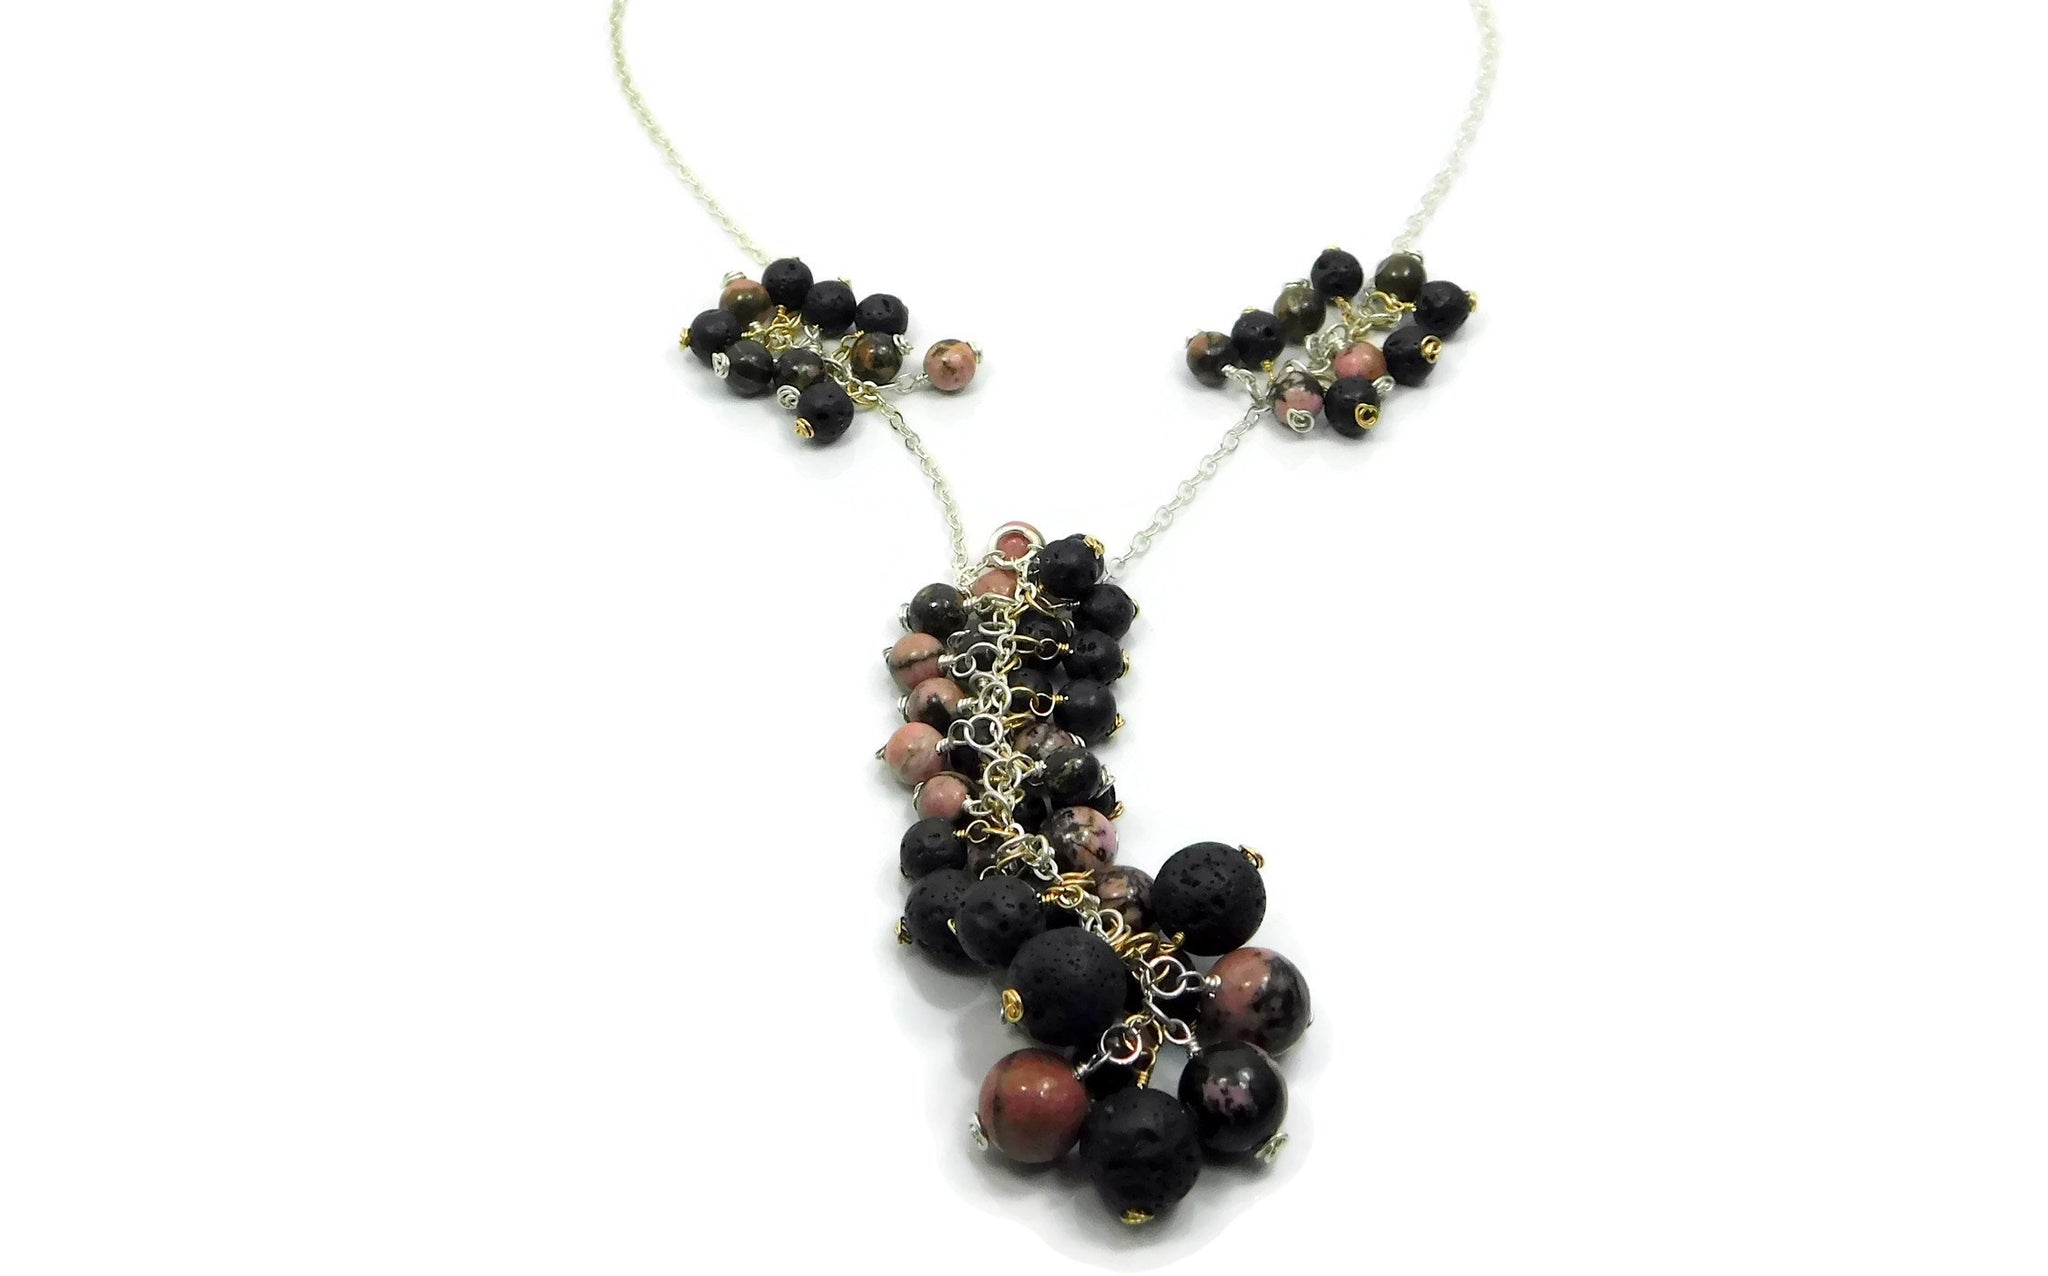 Rhodonite and Lava Stone Necklace in sterling silver and 14kt gold fill cold fusion jewelry gold and silver jewelry handmade silver jewelry sterling silver jewelry artisan jewelry handmade gemstone jewelry one of a kind jewelry unique jewelry